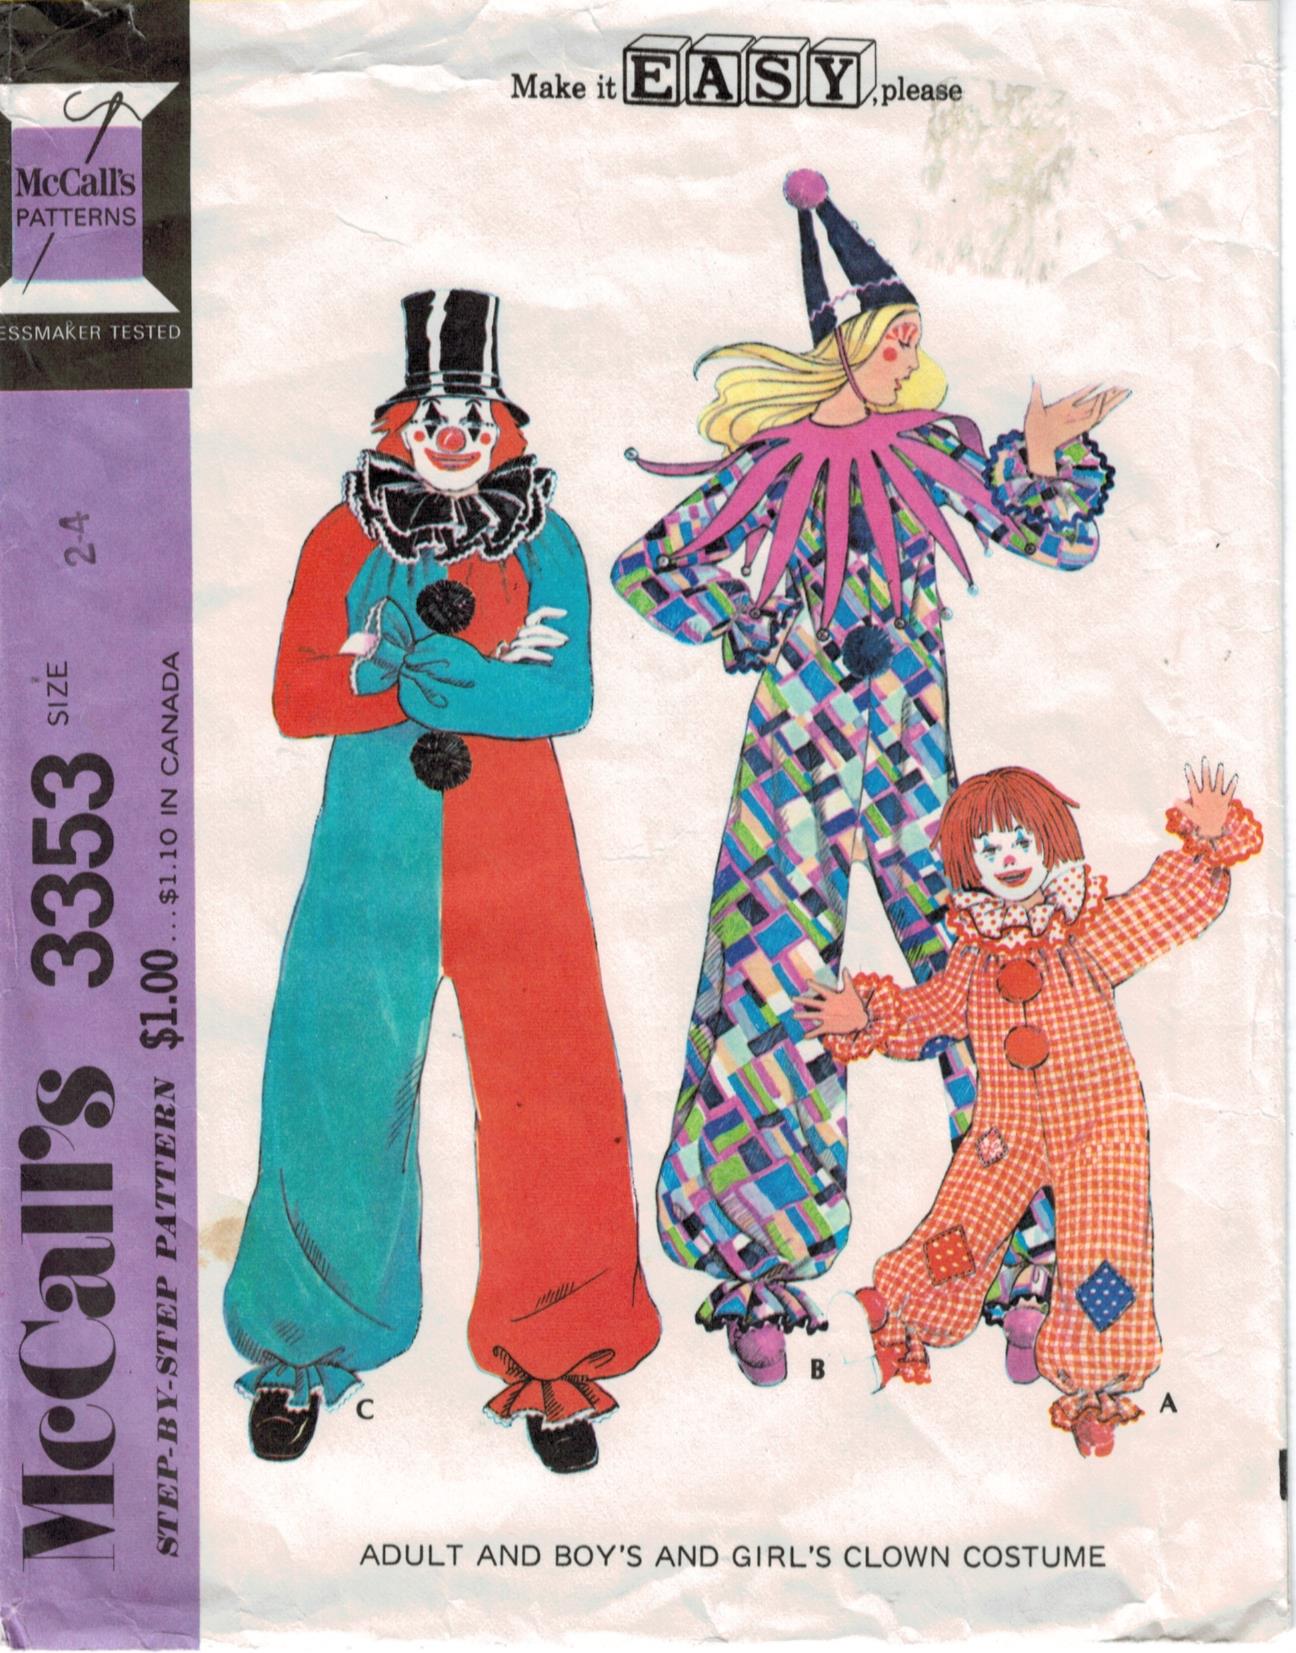 McCalls M6142 Learn to Sew Adult and Teen Clown Costume Sewing Pattern Sizes L-XL 